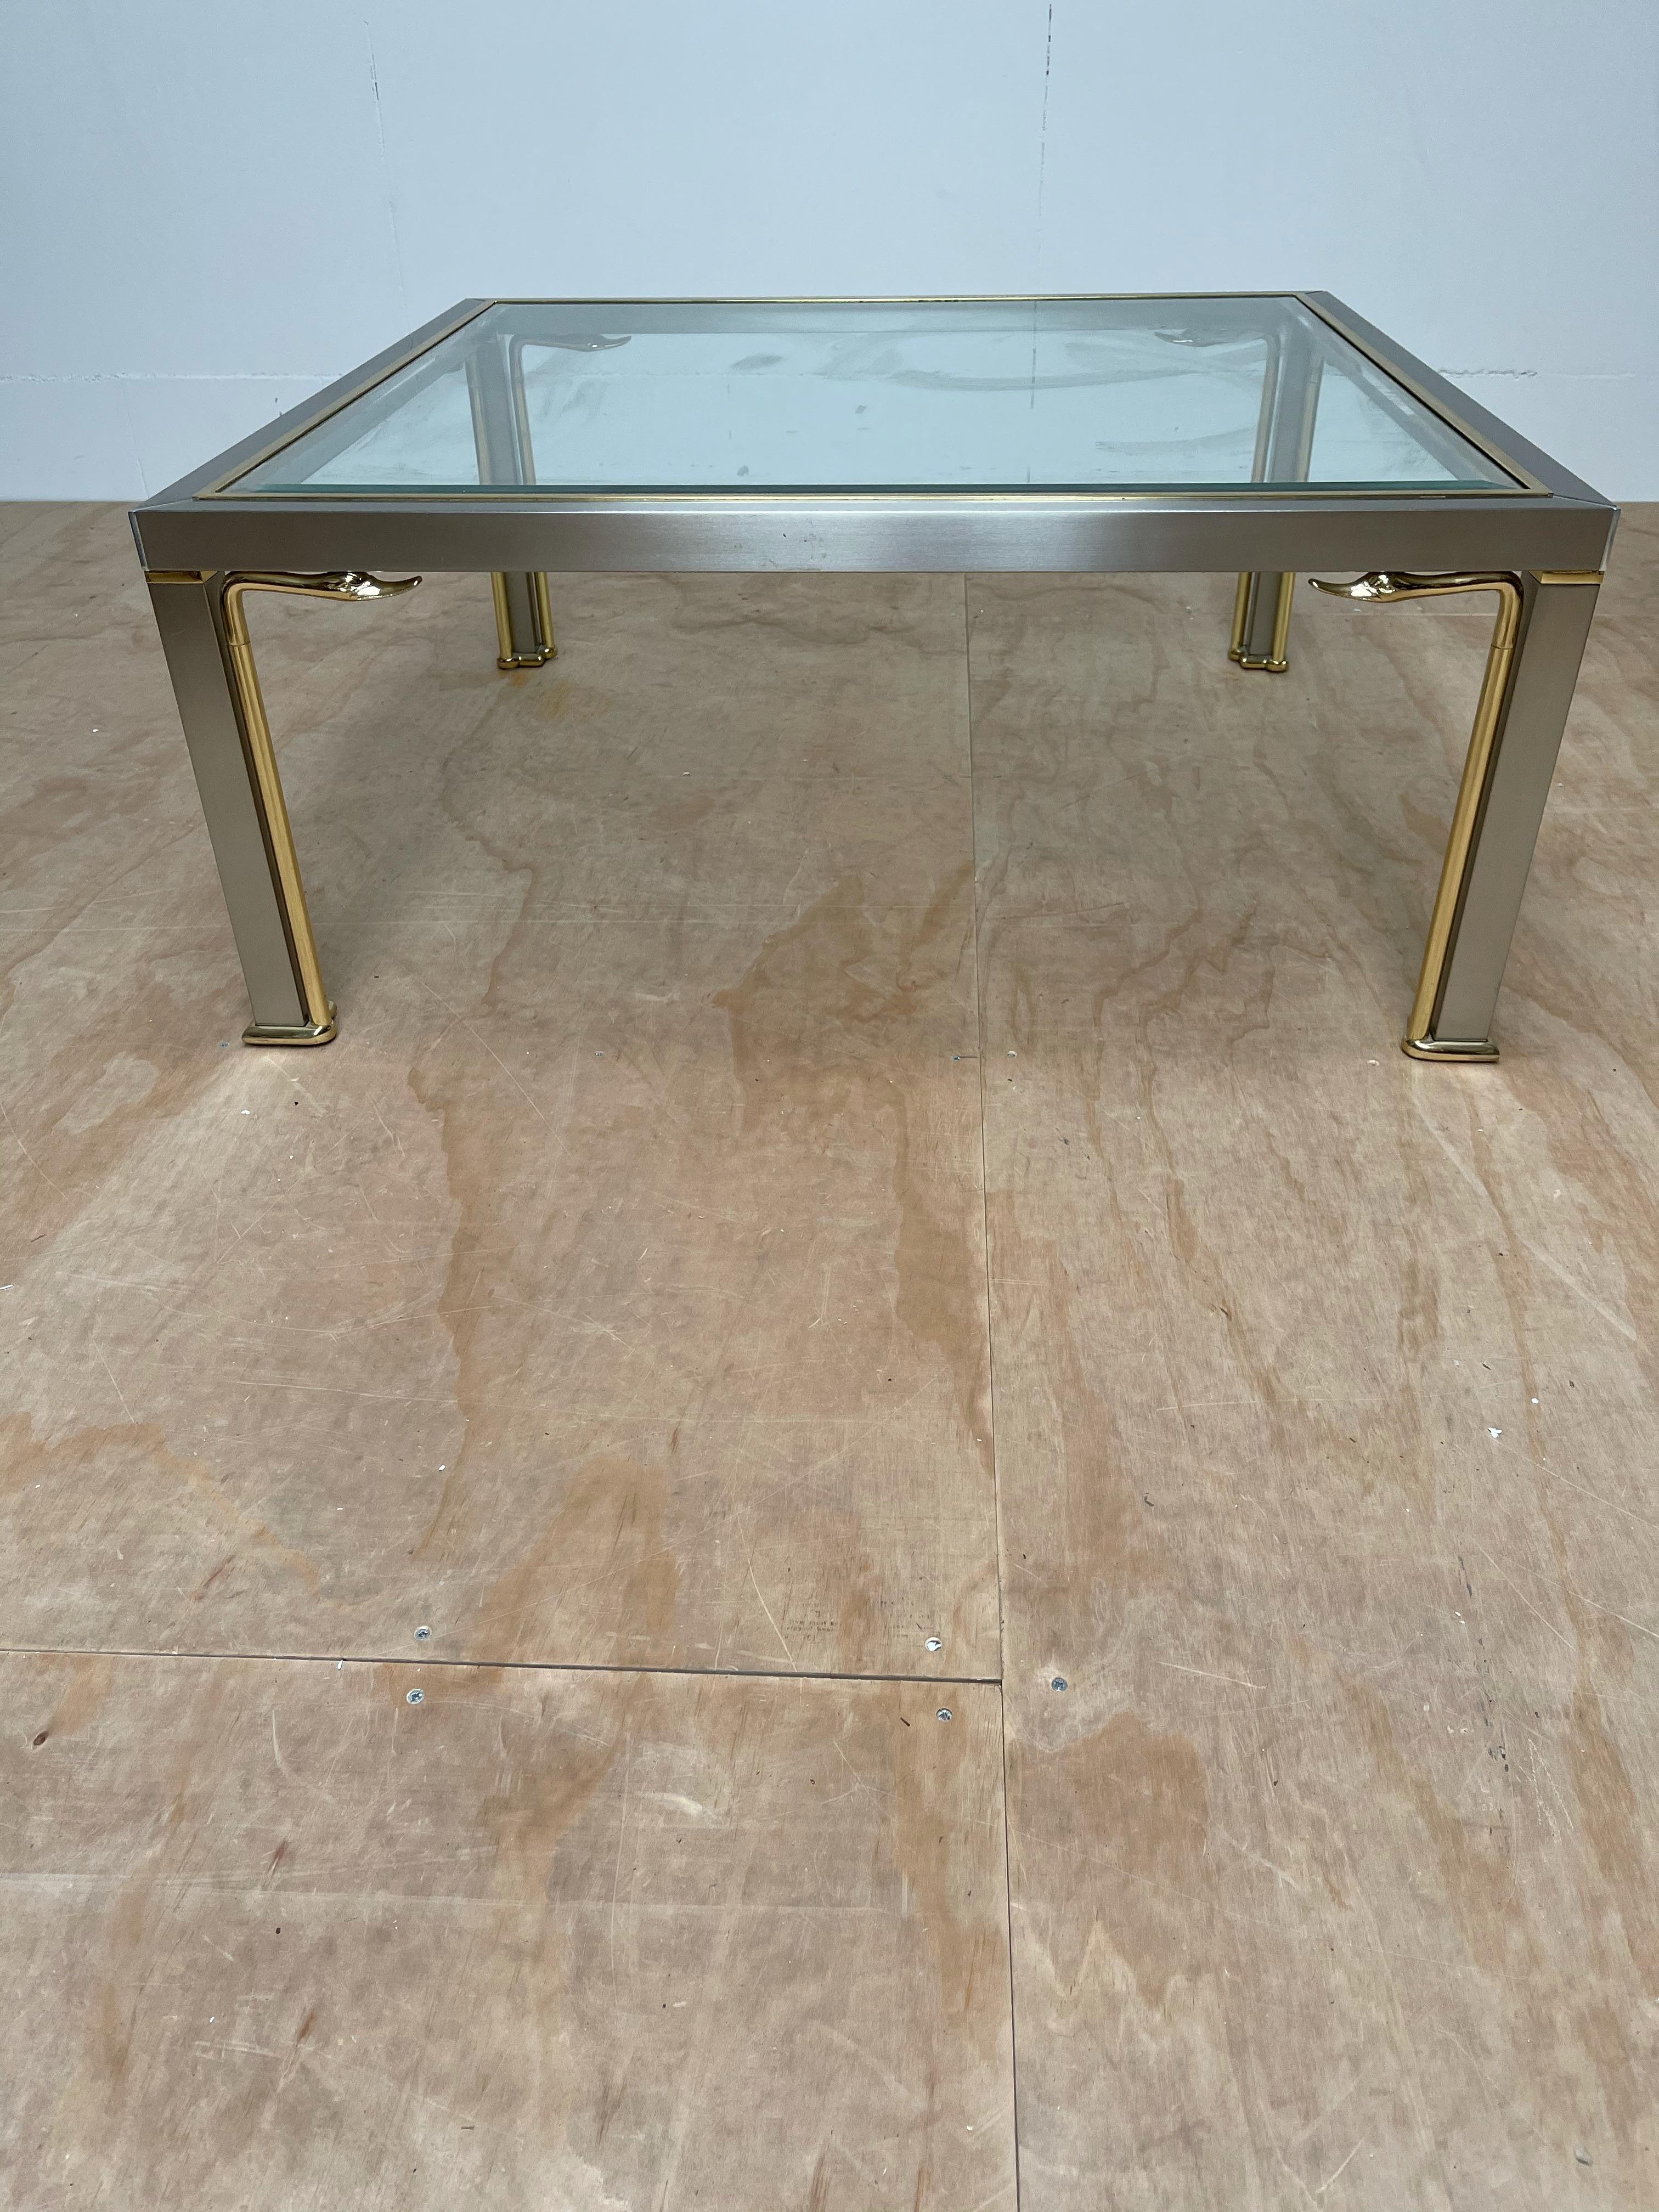 Good size, practical and very decorative square coffee table.

This beautiful quality coffee table is highly decorative and it comes with some impressive details. The best ofcourse are the eight elegant and stylized, bronze swan heads. Their grace